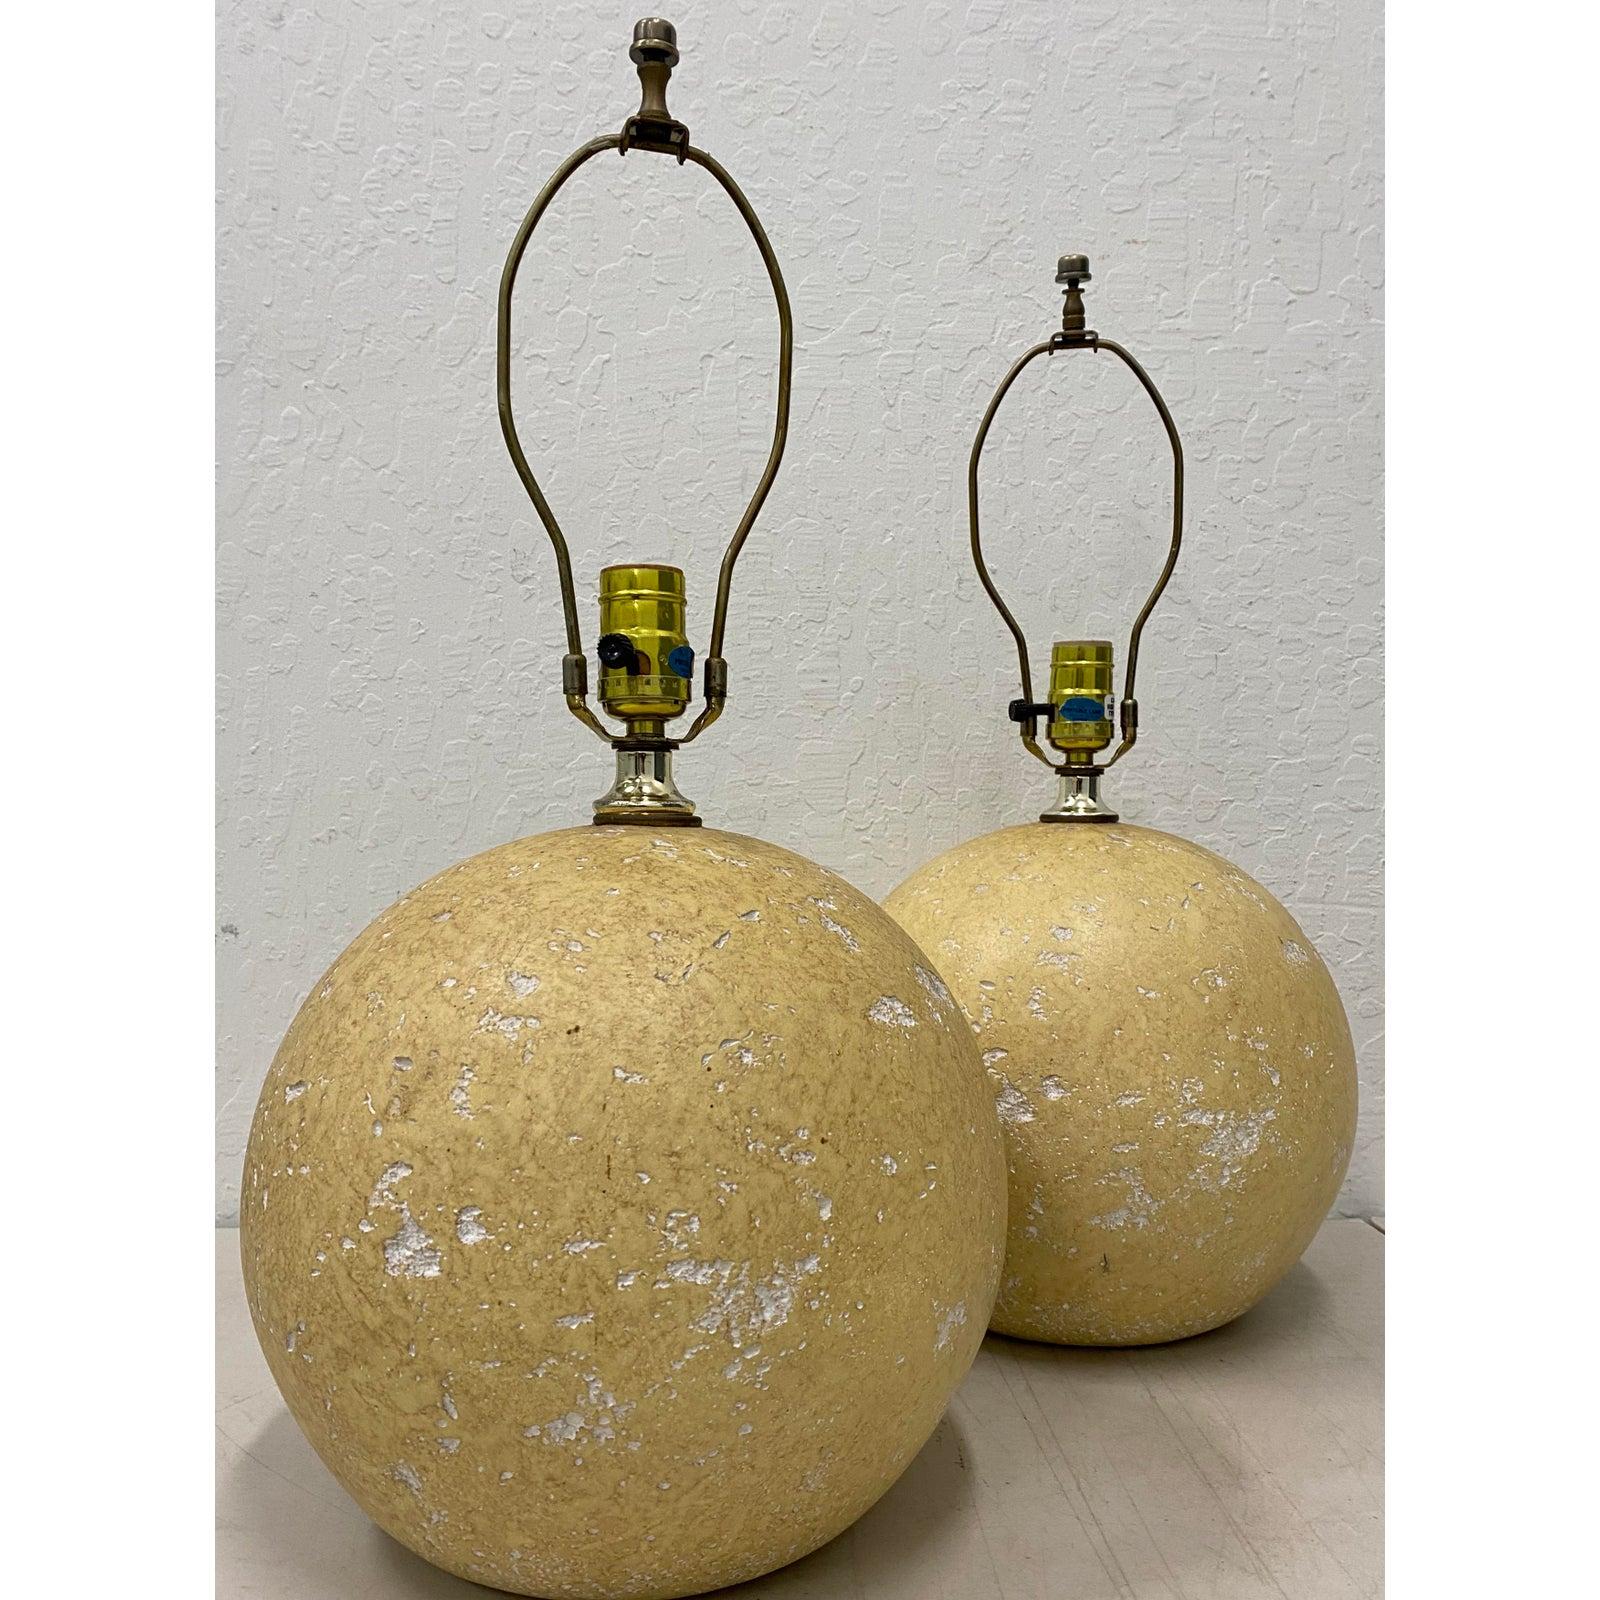 Pair of mid-20th century cratered moonscape table lamps

Dimensions 11